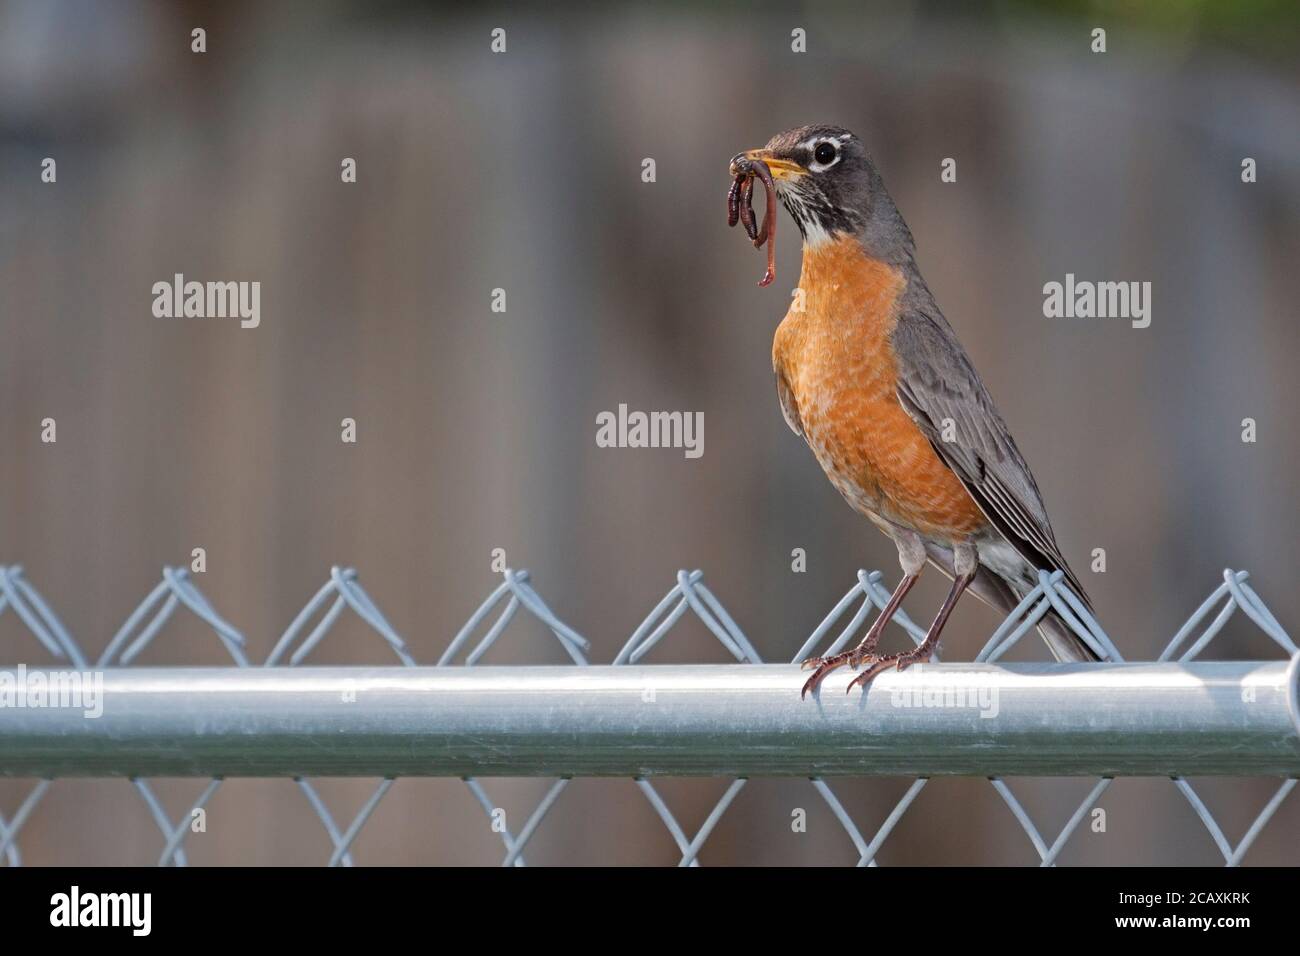 An American Robin clutches an earthworm in its beak while standing on a chainlink fence. Stock Photo